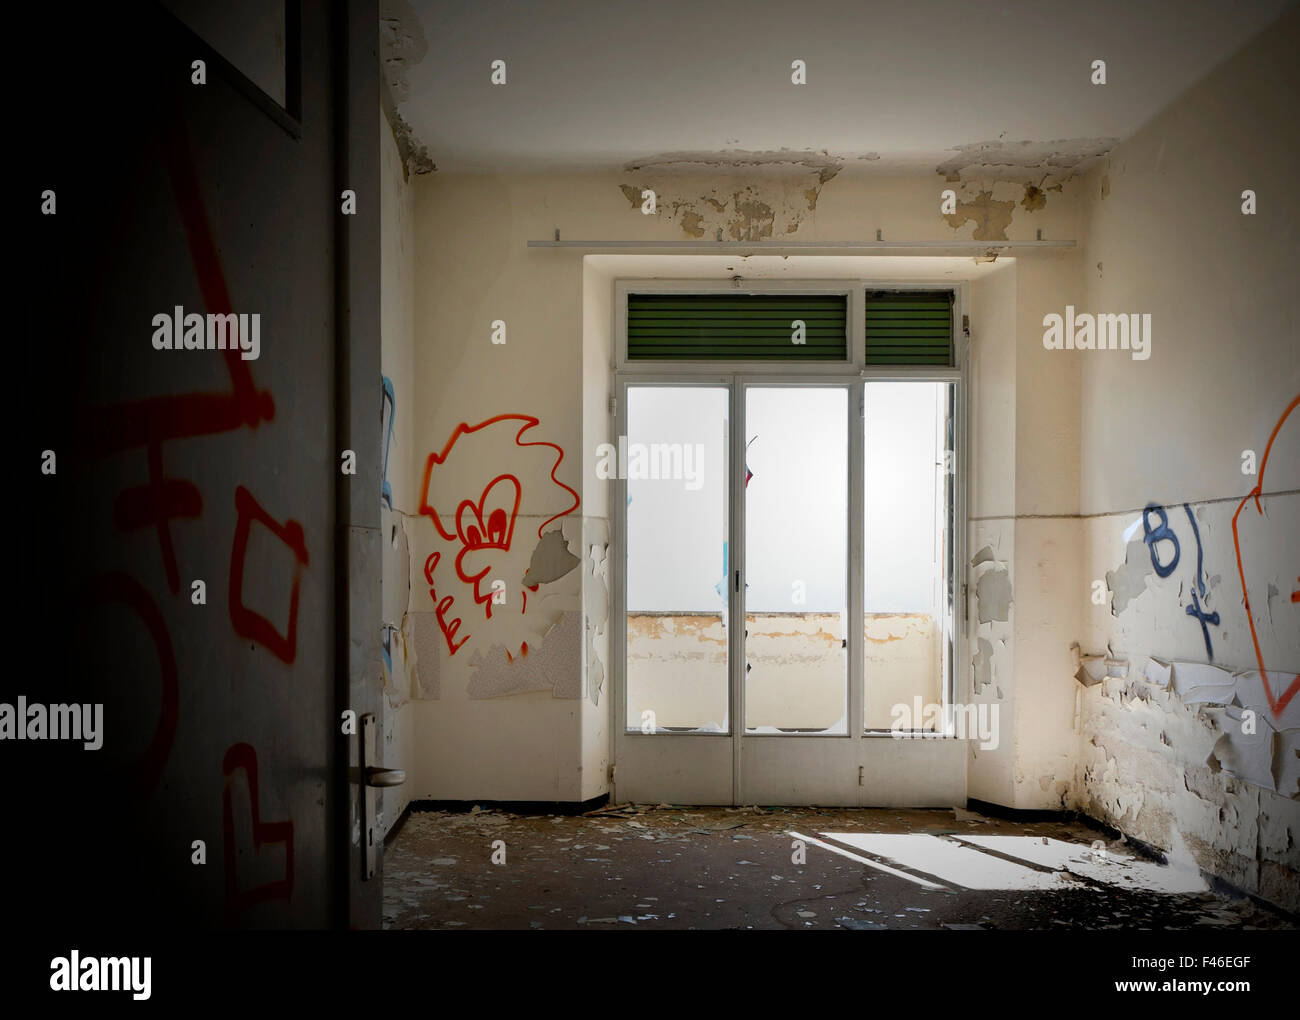 abandoned building, empty room with window Stock Photo